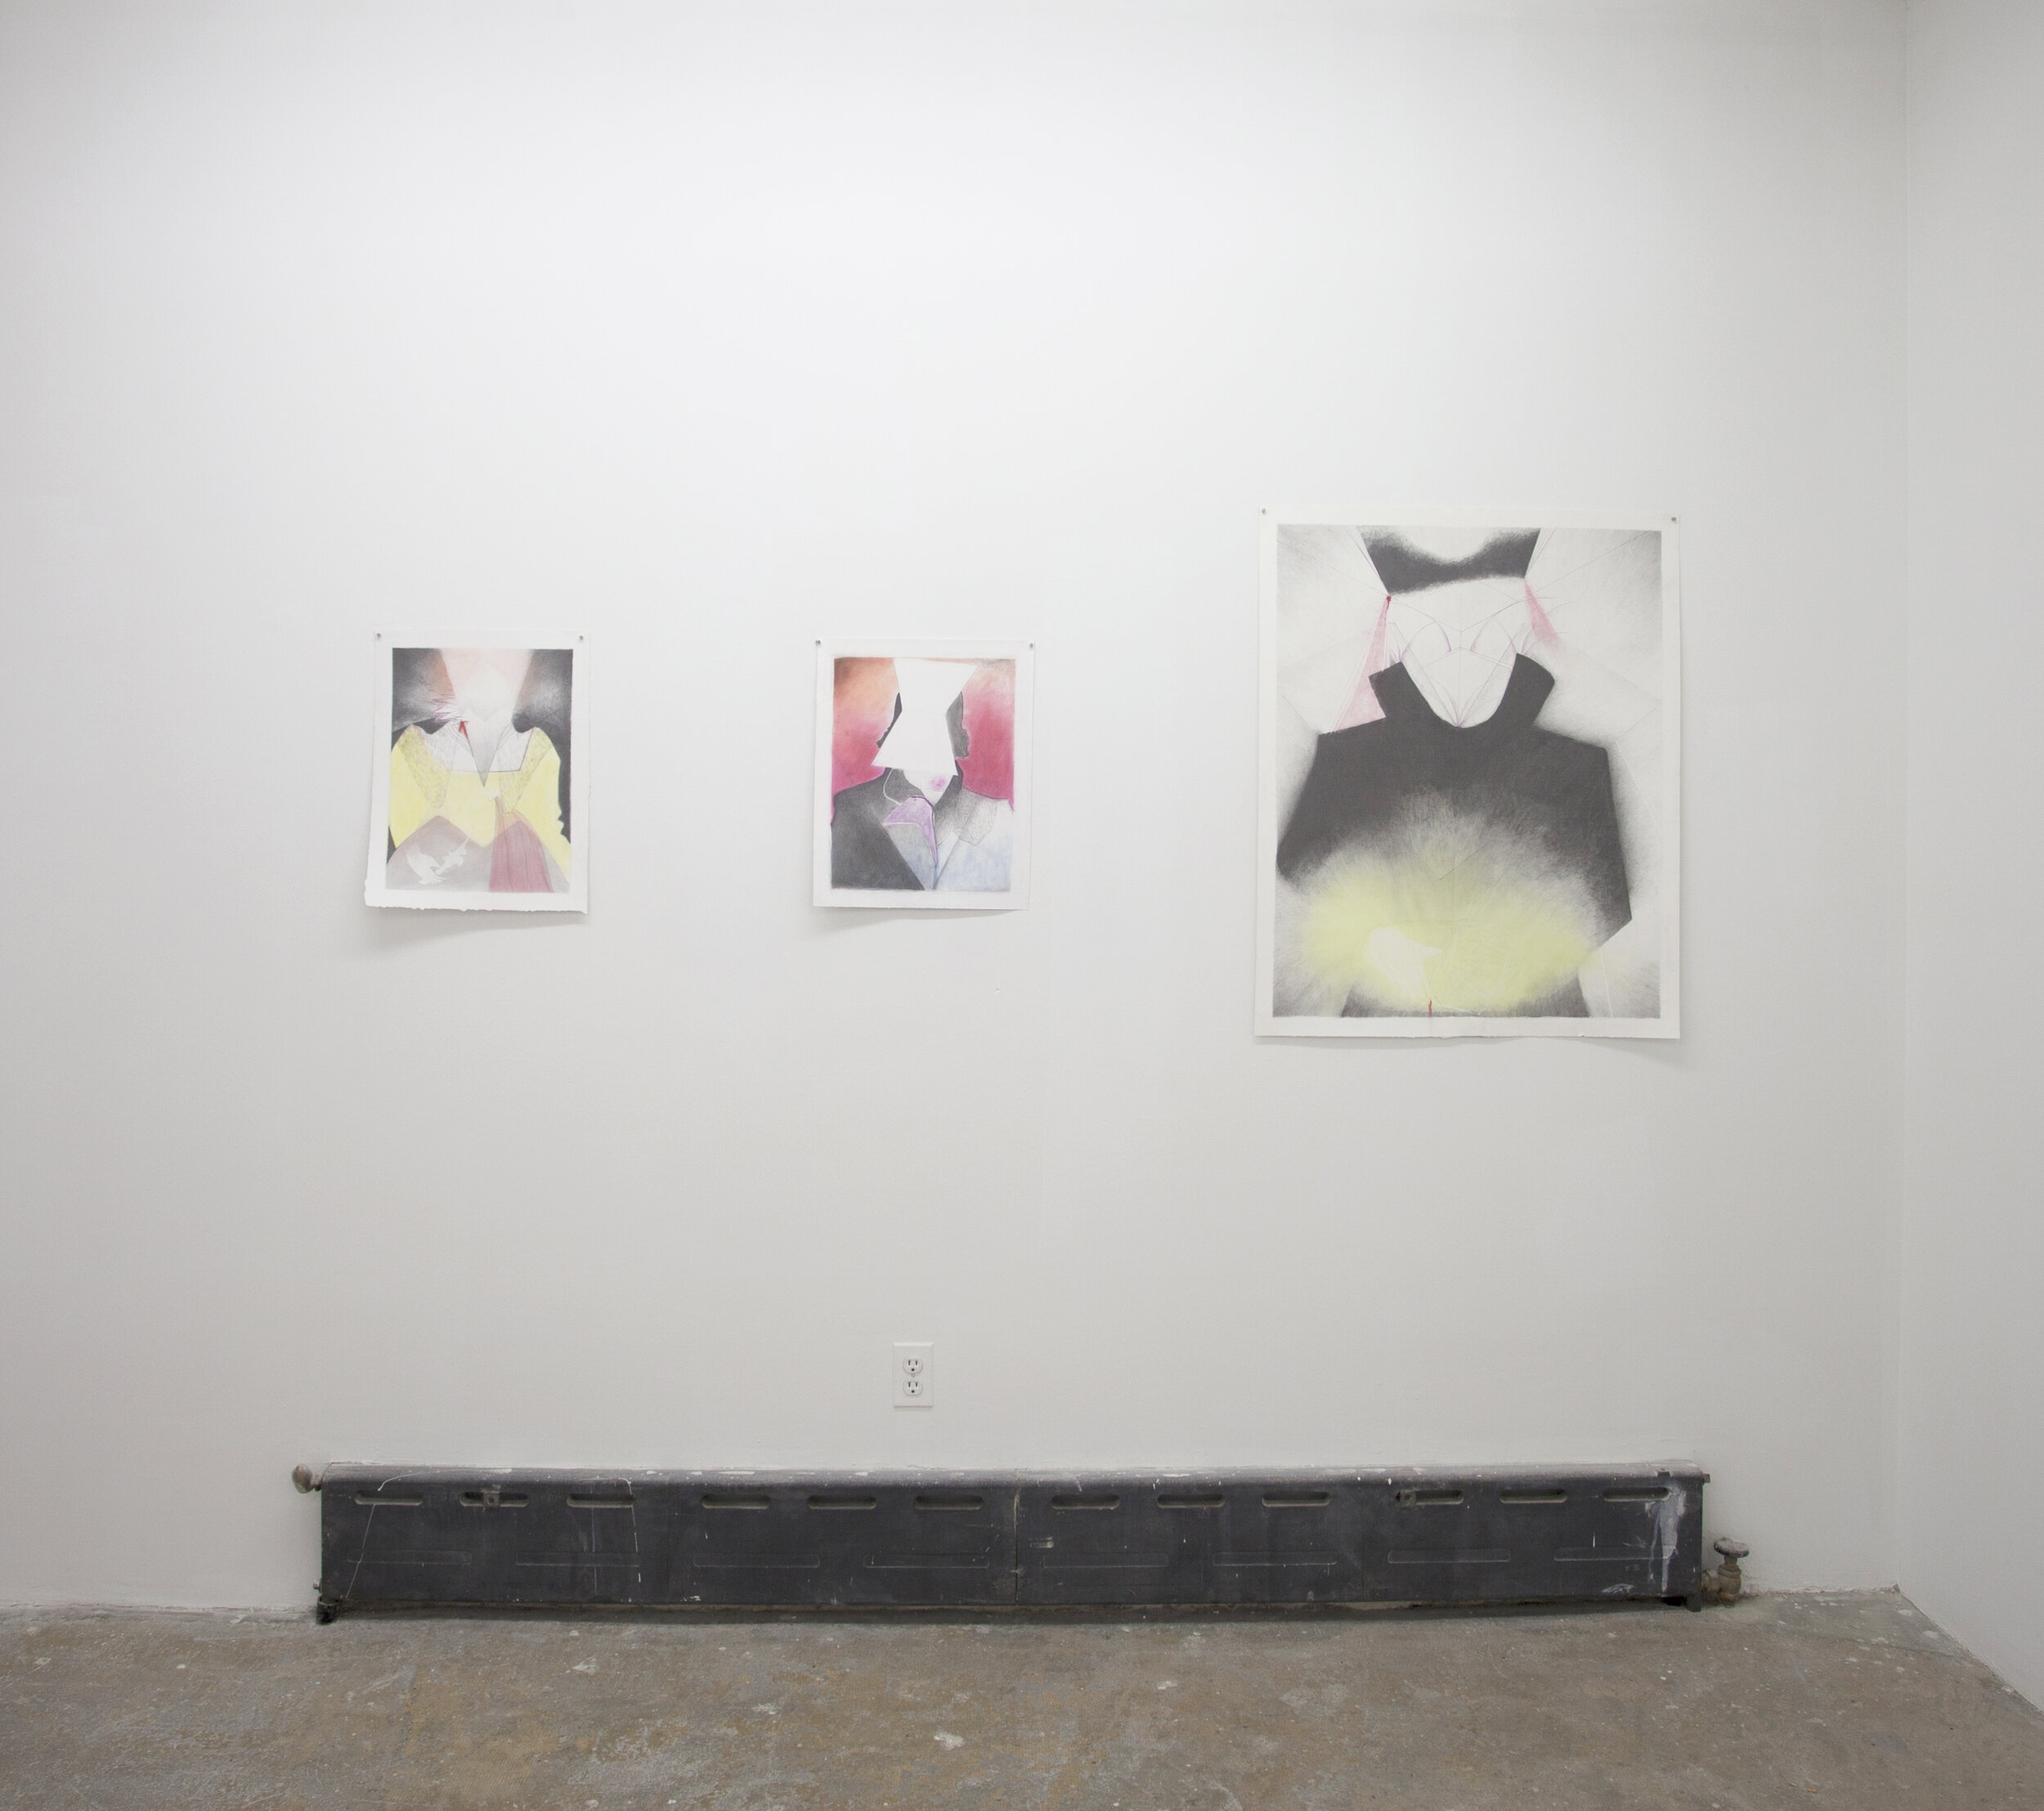 Installation images of works by Adam Hayes from Inter Canem et Lupum, at Cindy Rucker Gallery